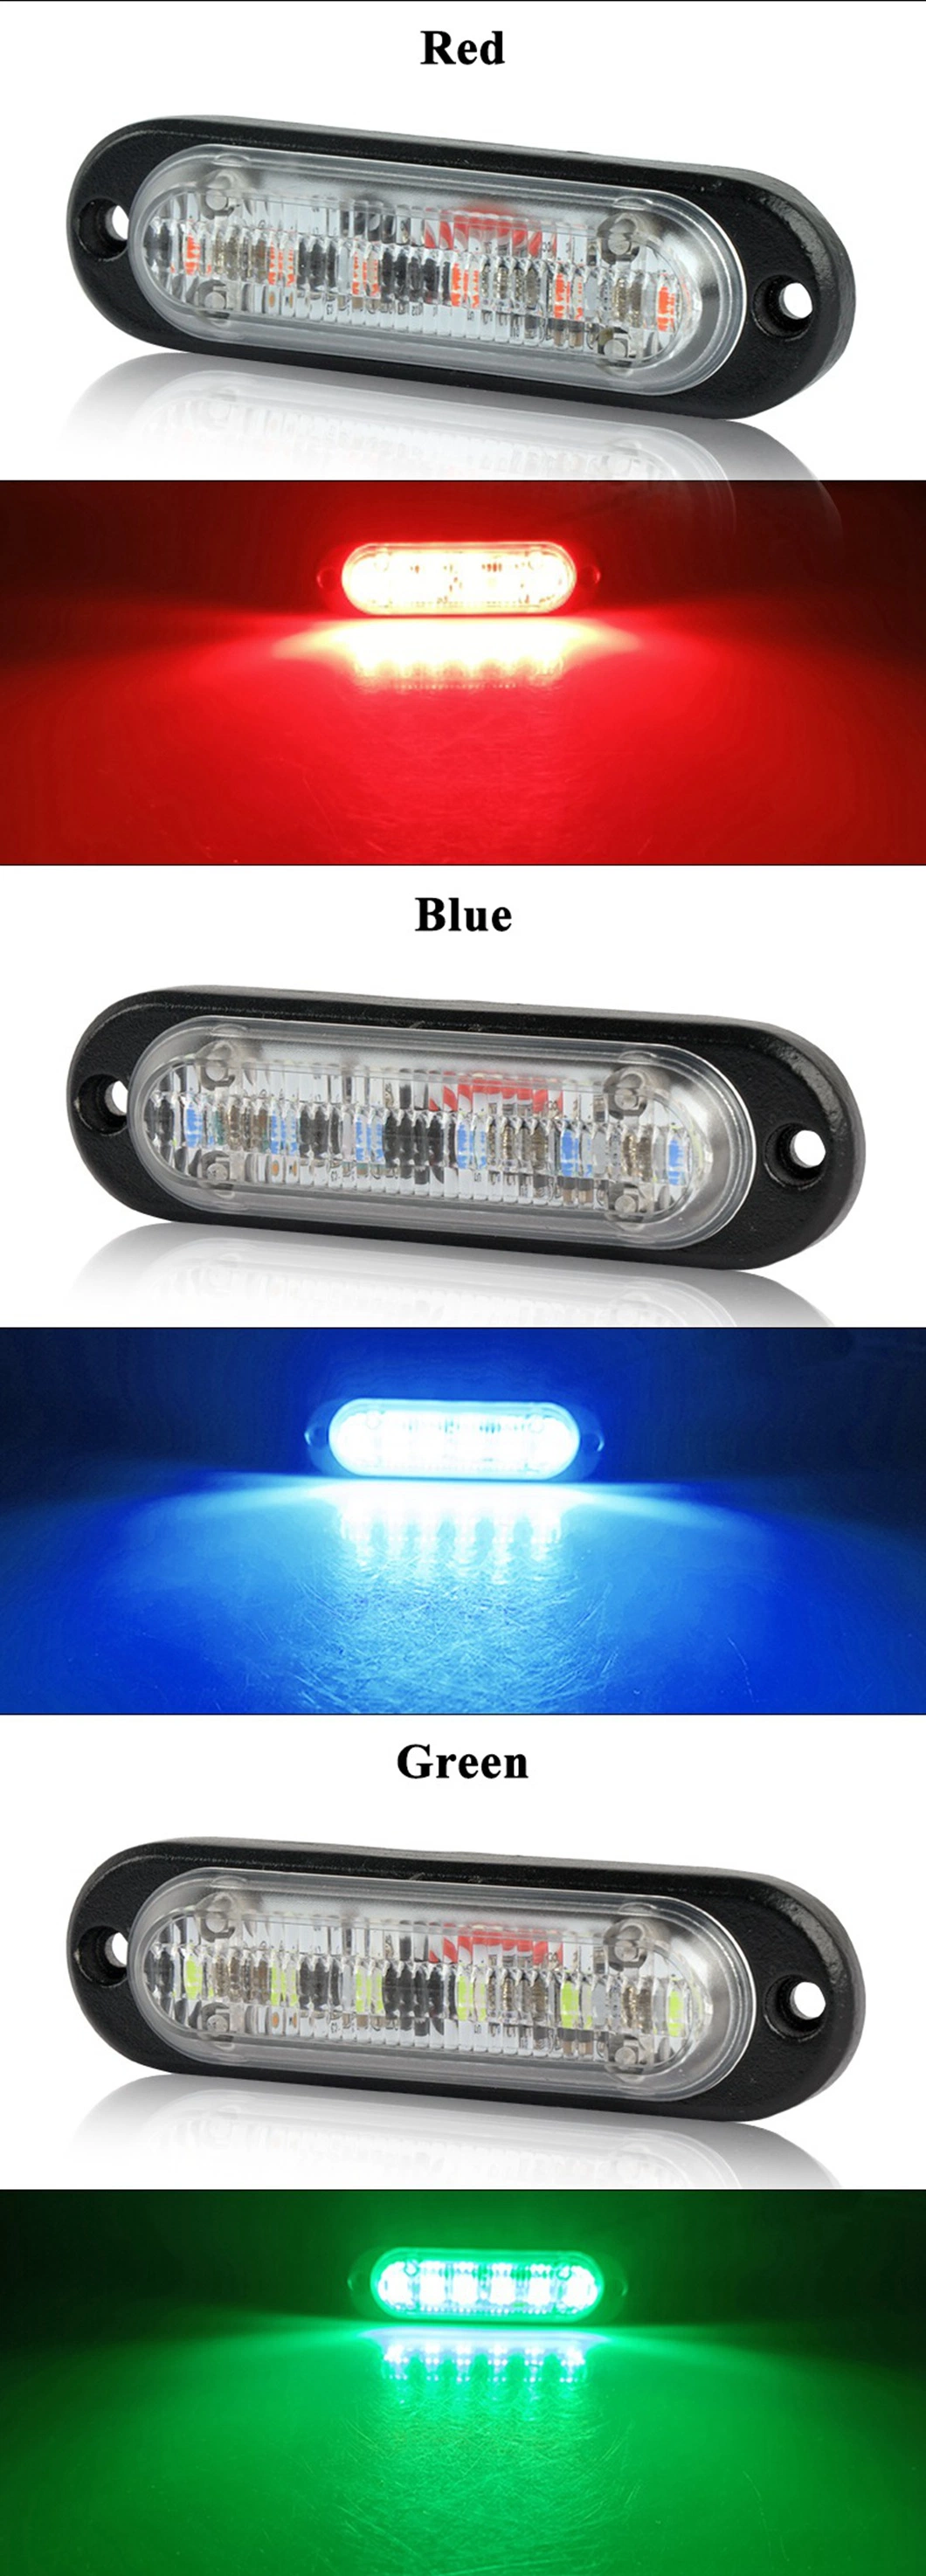 Crek Auto Parts Red Amber White Green Blue 6 Diodes LED Turn Signal Truck Trailer Side Marker Indicator Light for Bus Boat Van Lorry